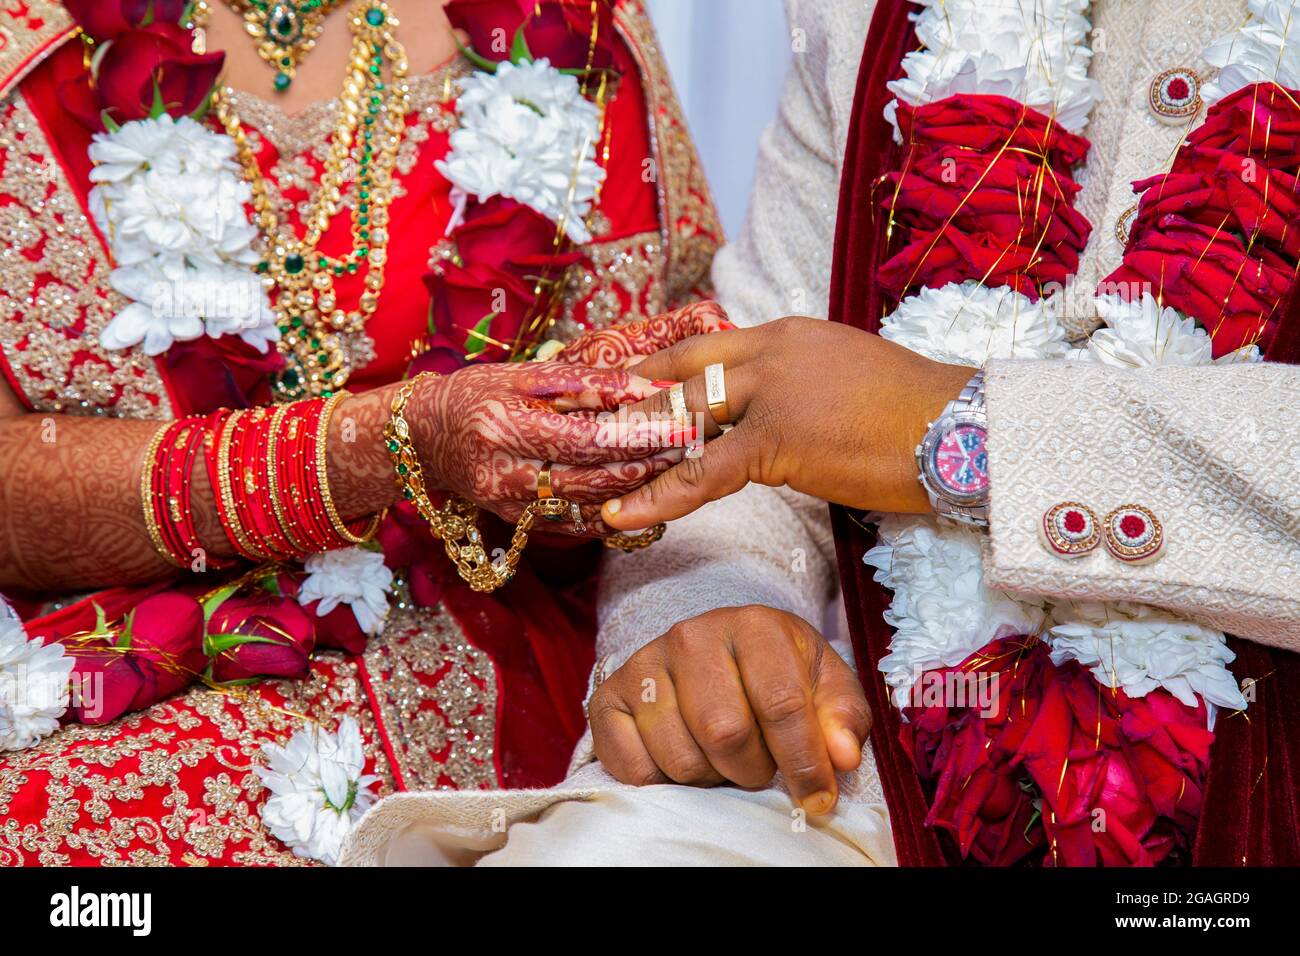 Bride with bridal jewelry and henna decoration on her hand attaches ring to  the groom's finger at traditional religious ceremony at a Hindu wedding  Stock Photo - Alamy